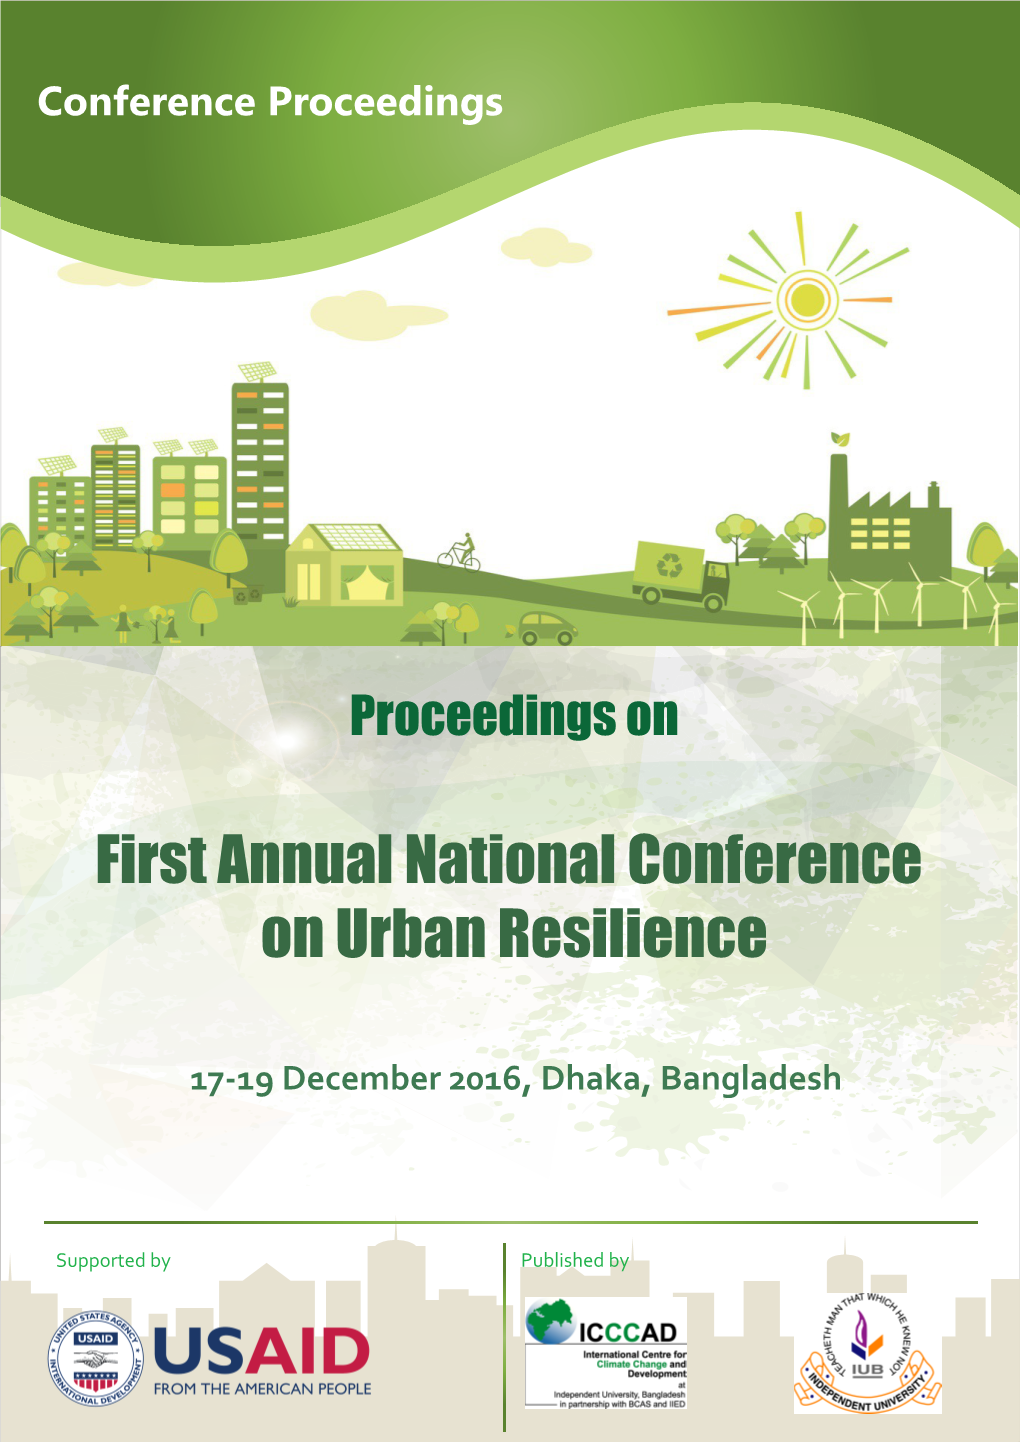 First Annual National Conference on Urban Resilience